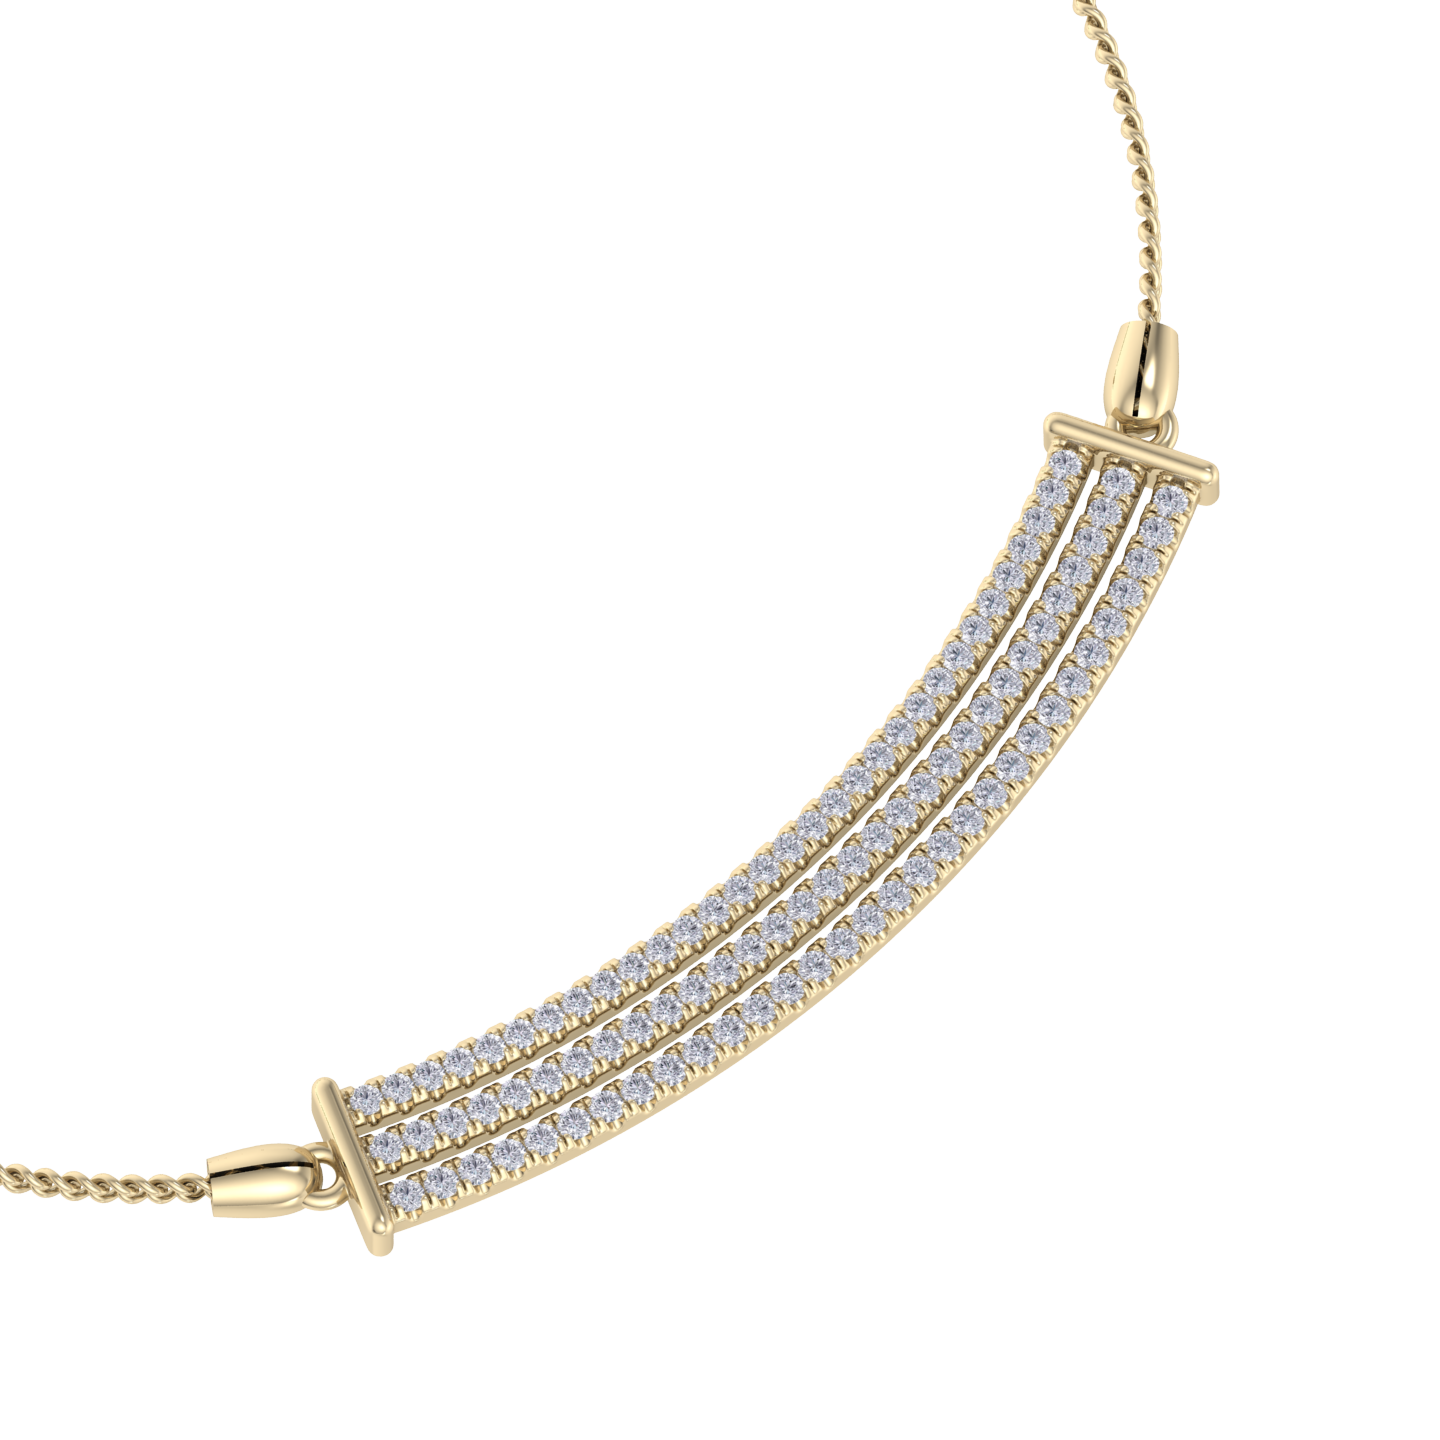 Diamond bar necklace in yellow gold with white diamonds of 0.93 ct in weight